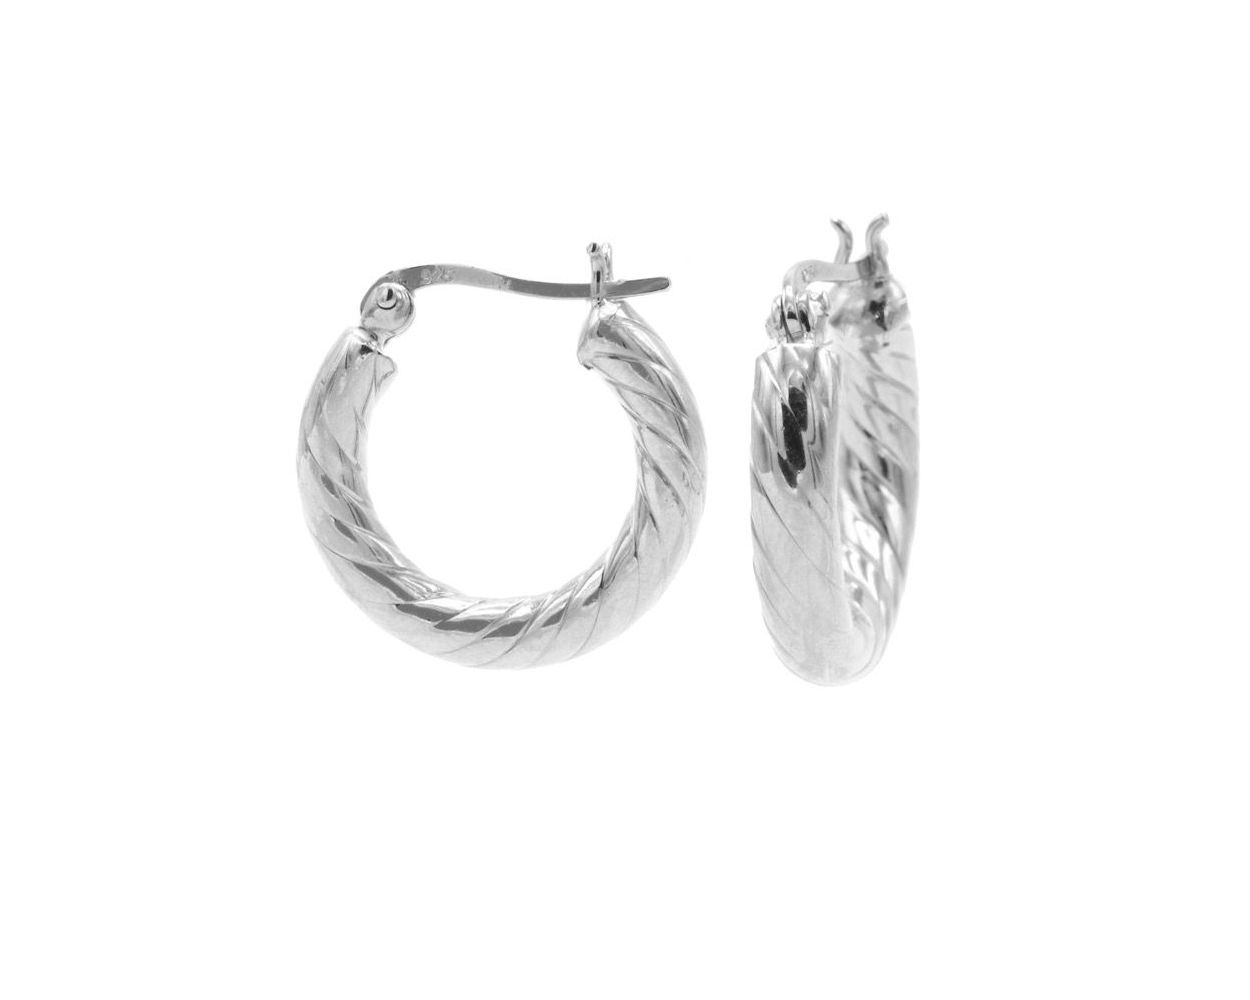 Plain Hoops Twister Small - Silver